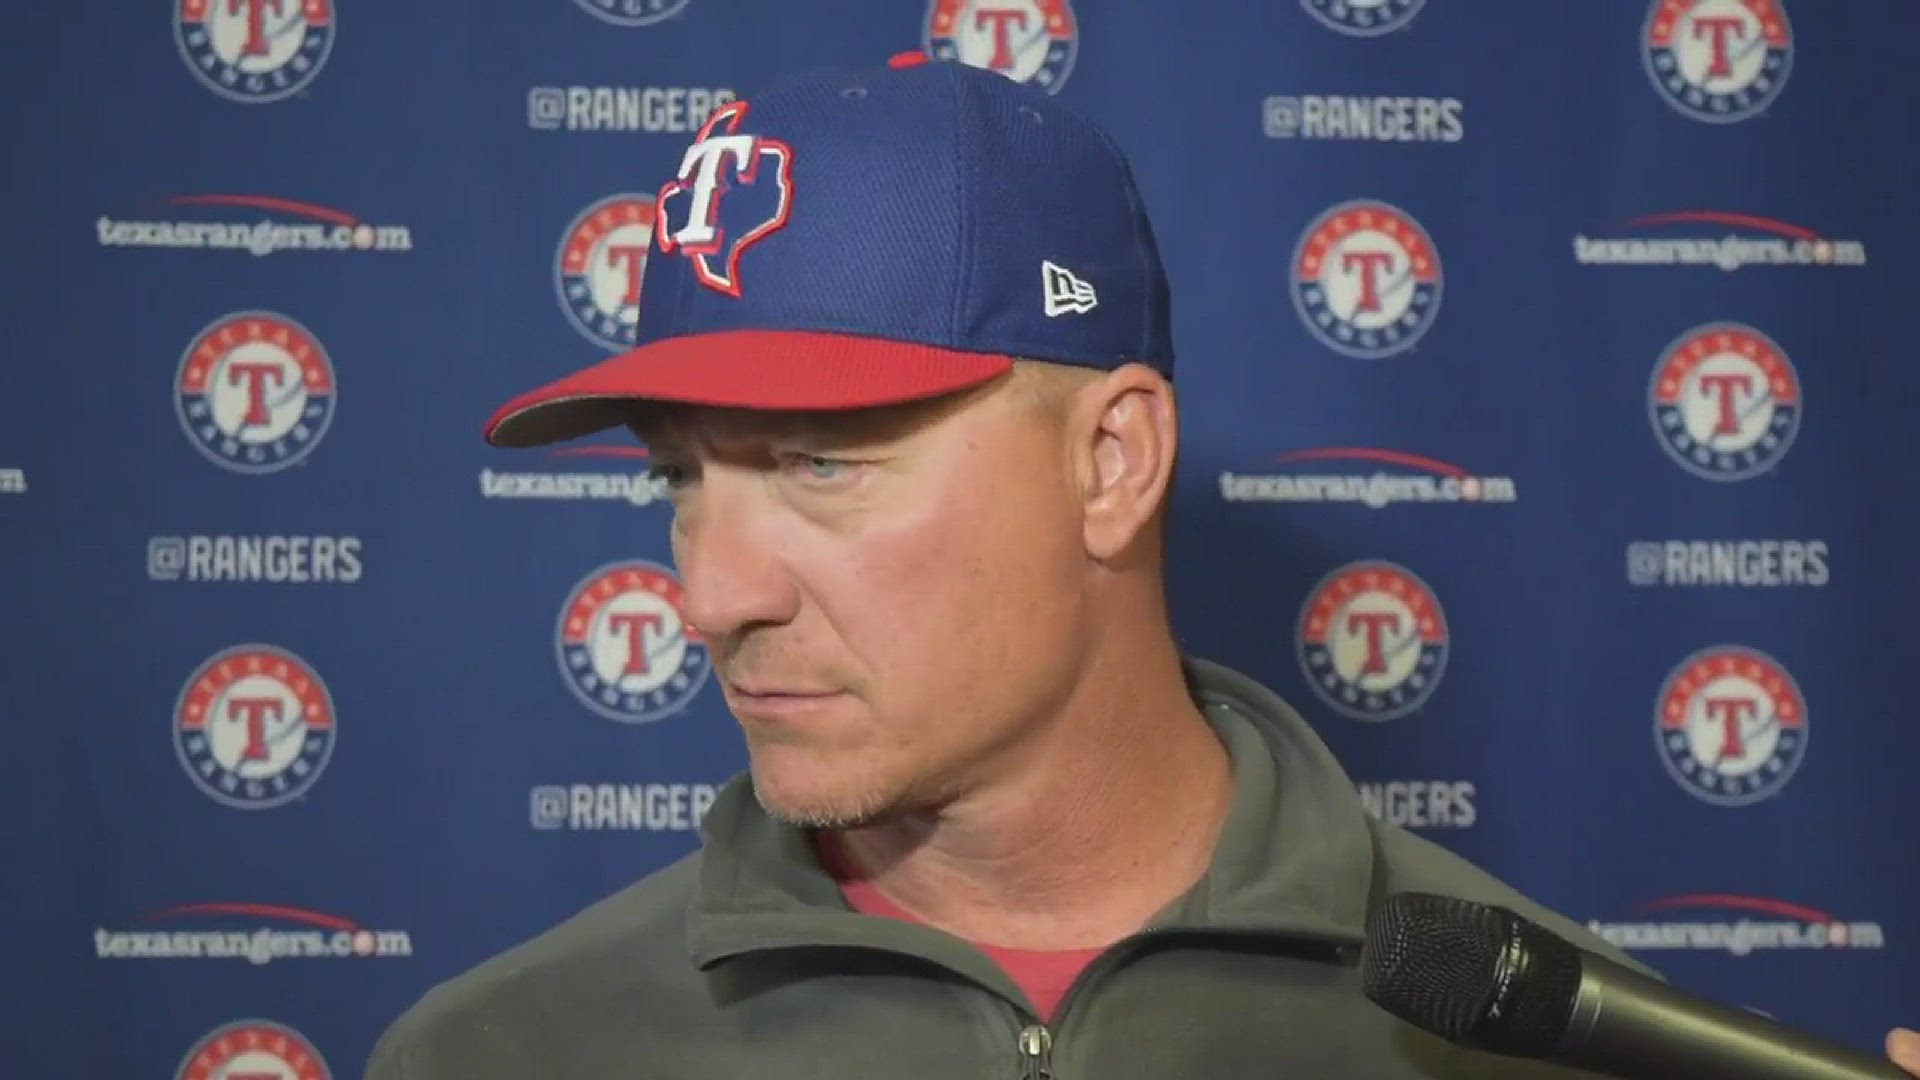 Jeff Banister talks about why he doesn't rely only on his memory